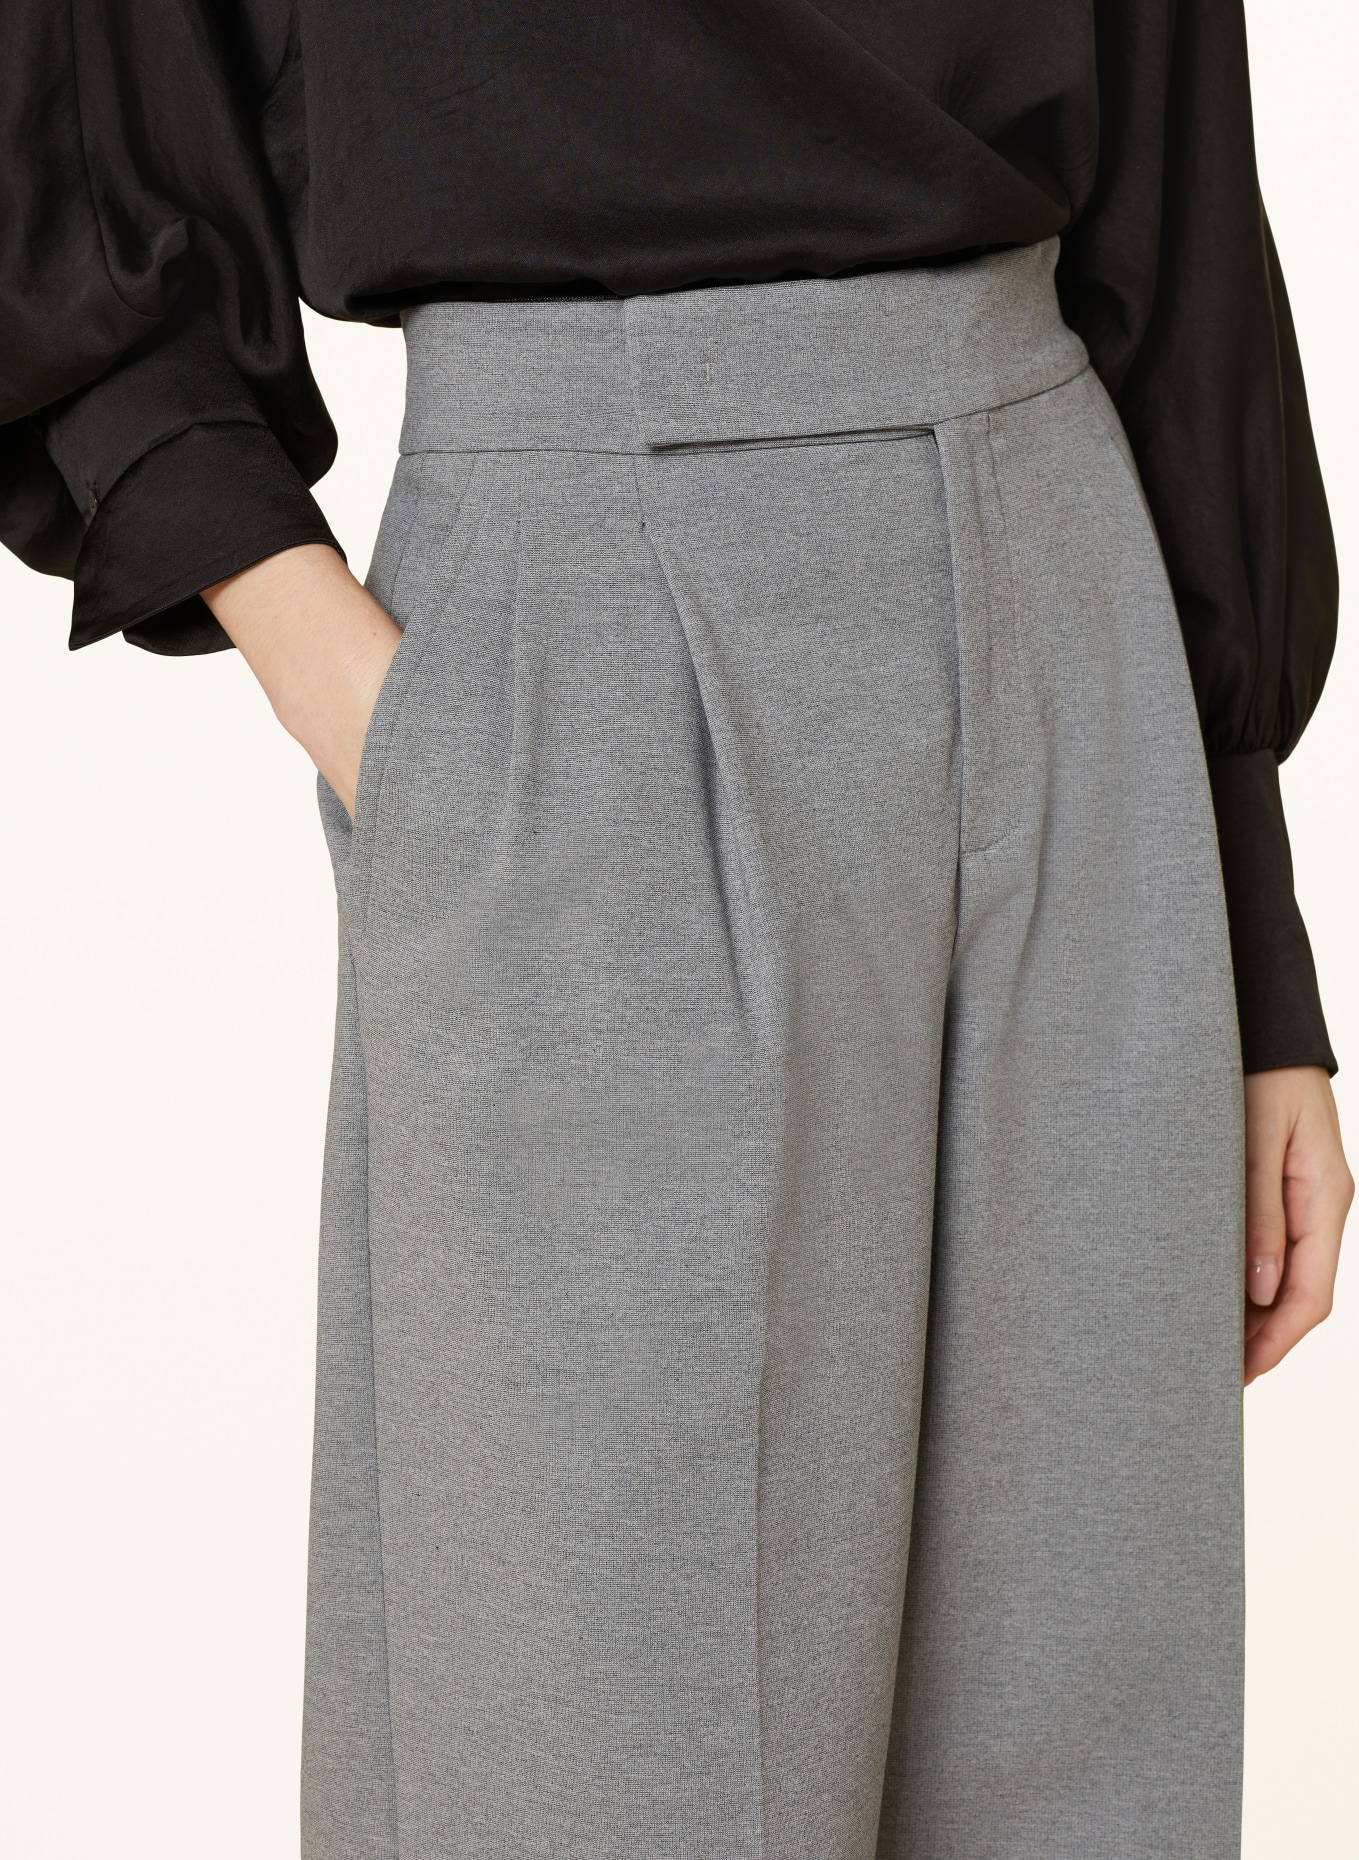 VANILIA Wide leg trousers made of jersey, Color: LIGHT GRAY (Image 5)